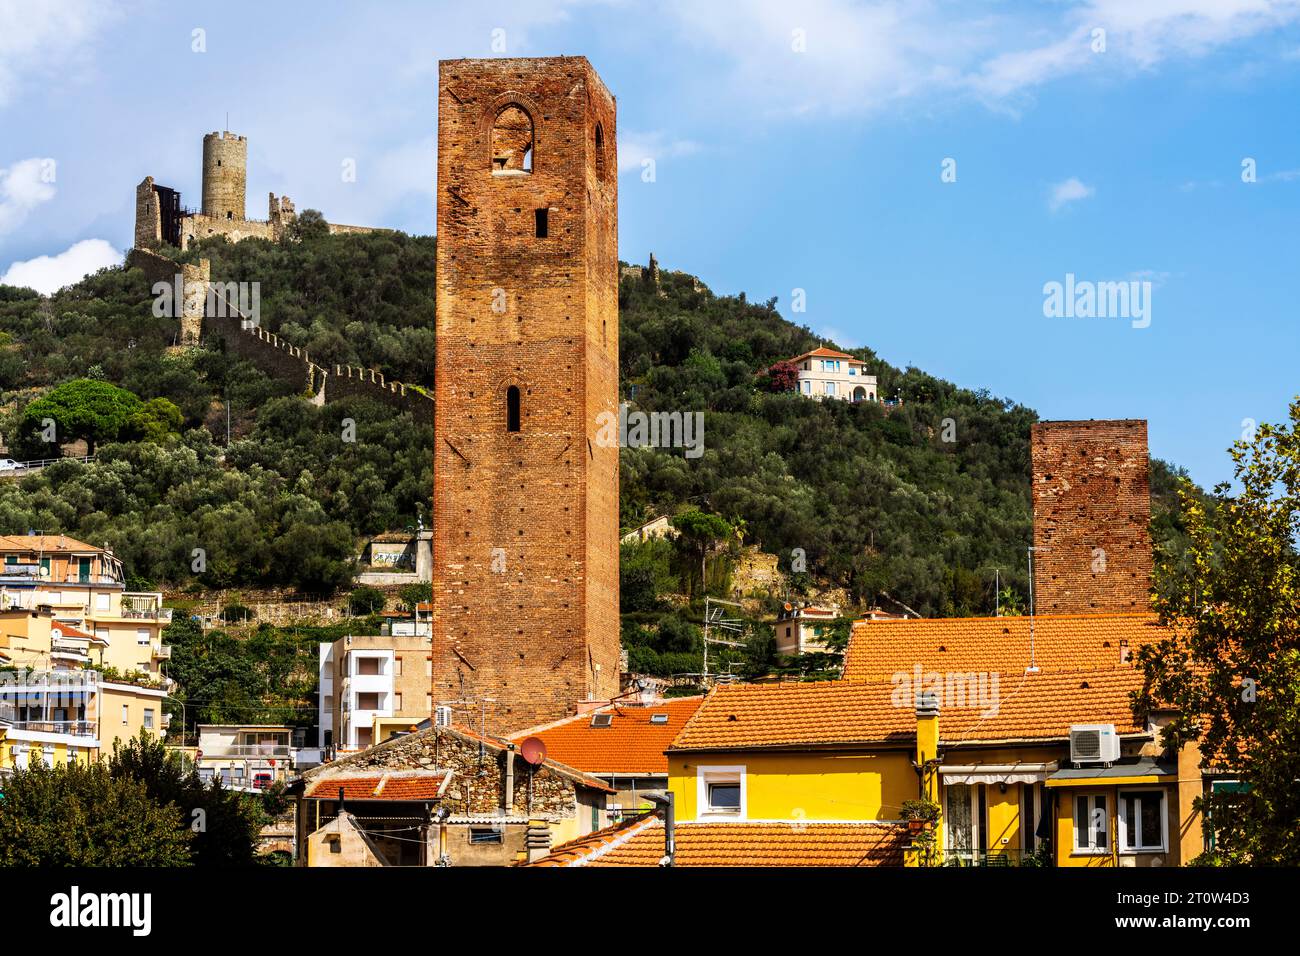 The Mount Ursino Castle of Noli rises on the top of a hill overlooking Noli. Italy.The castle was able to control both the sea and the Ligurian coast. Stock Photo